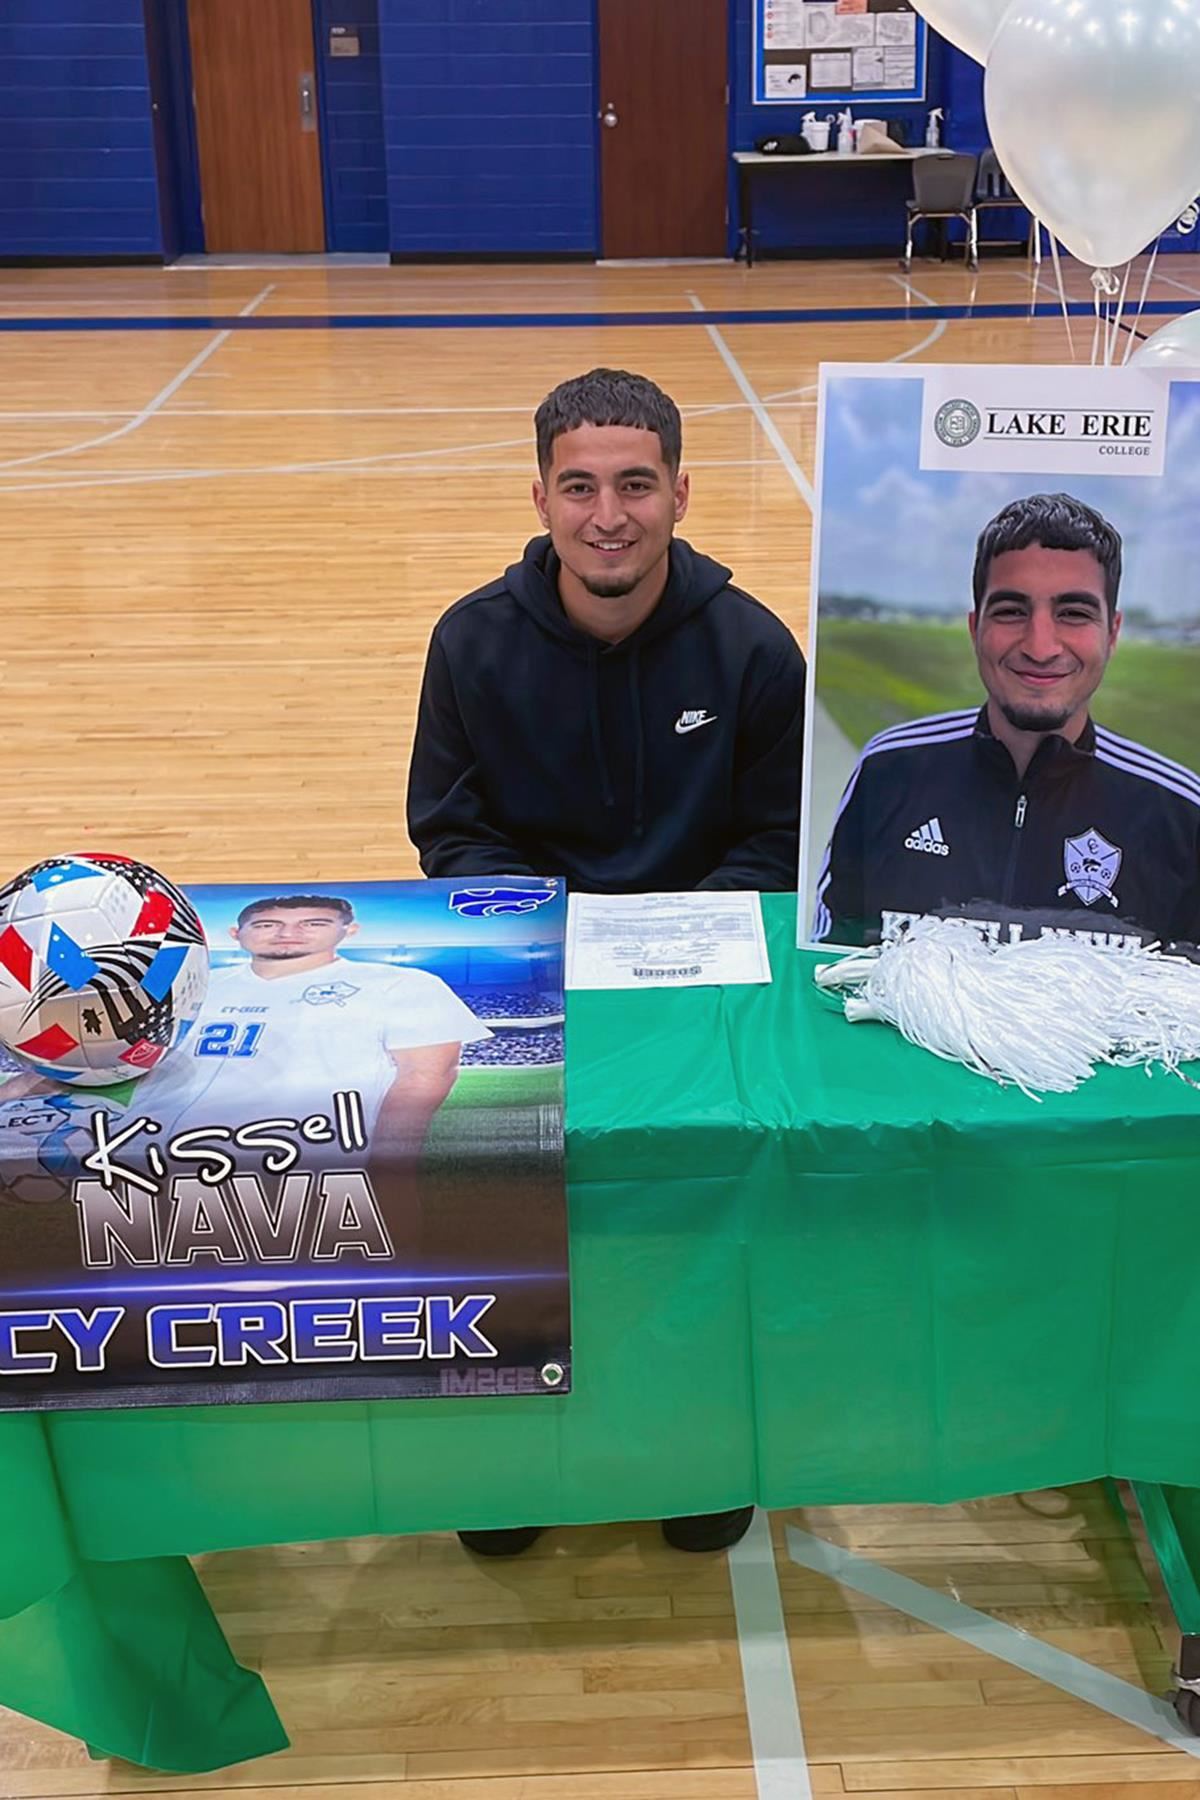 Cypress Creek High School senior Kissell Nava signed a letter of intent to play soccer at Lake Erie College.